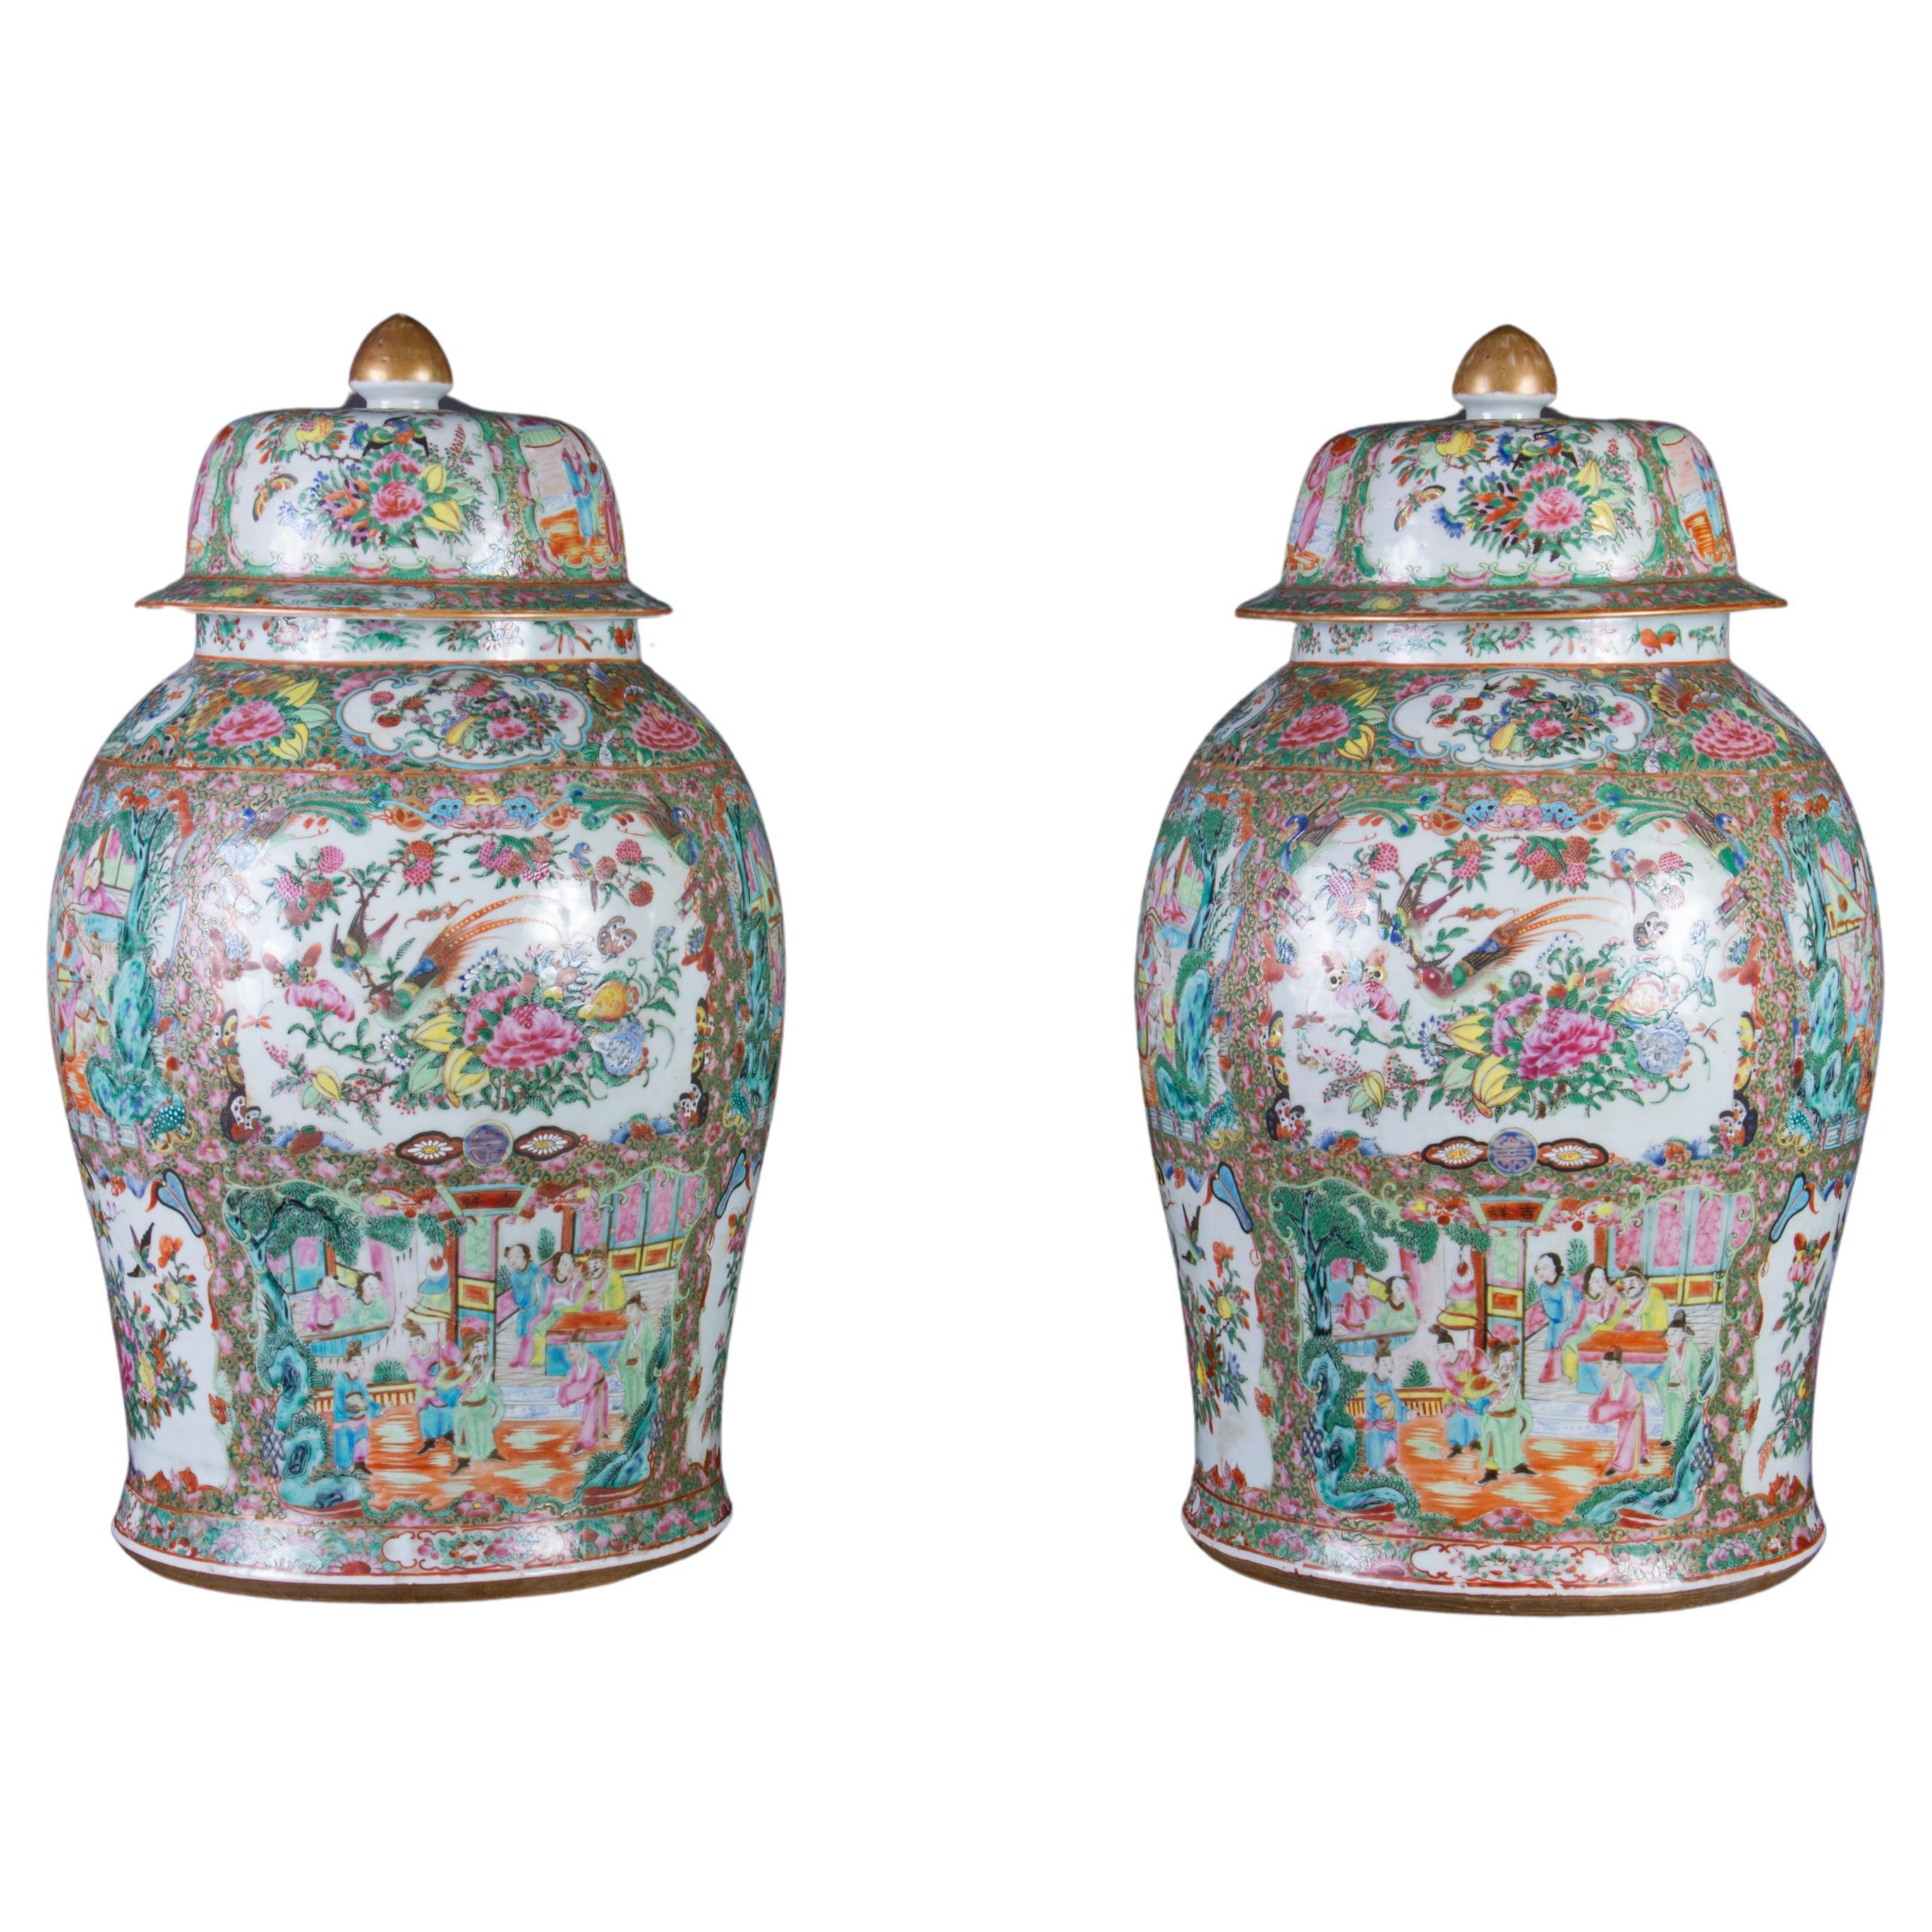 Pair: Exquisite Early 19th Century Chinese Rose Medallion Porcelain Temple Jars For Sale